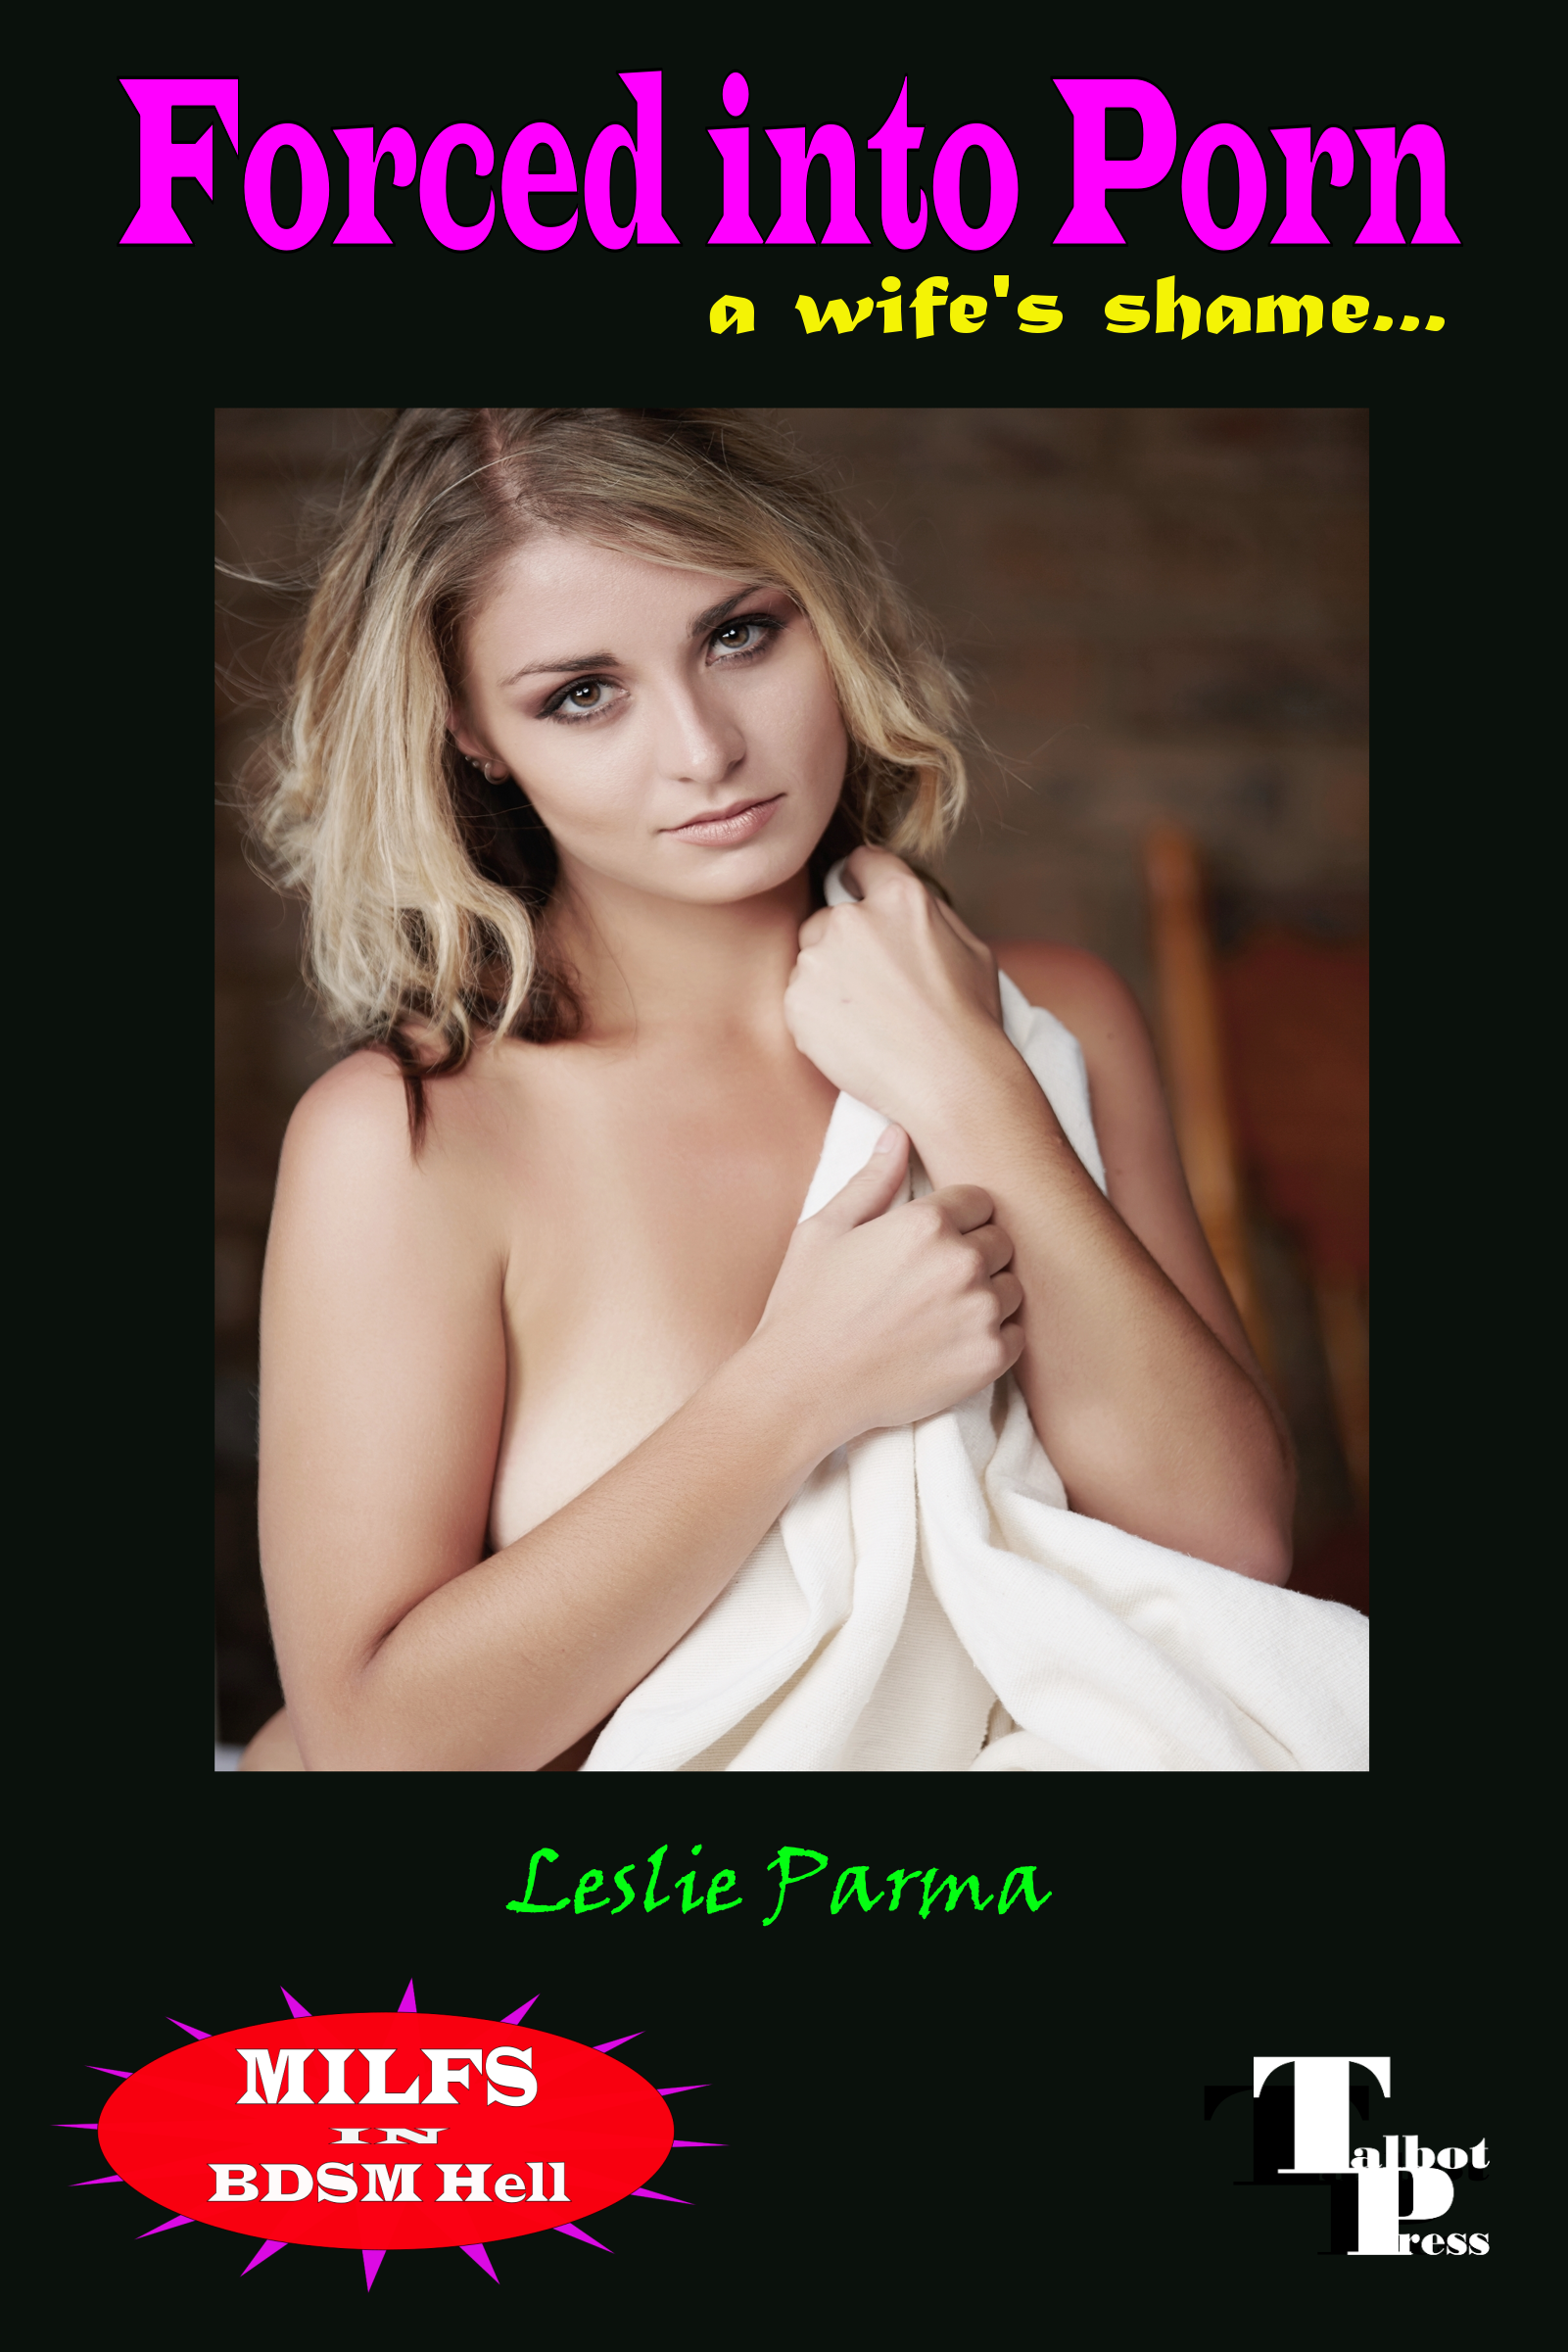 Forced Housewife Porn - Forced into Porn, an Ebook by Leslie Parma